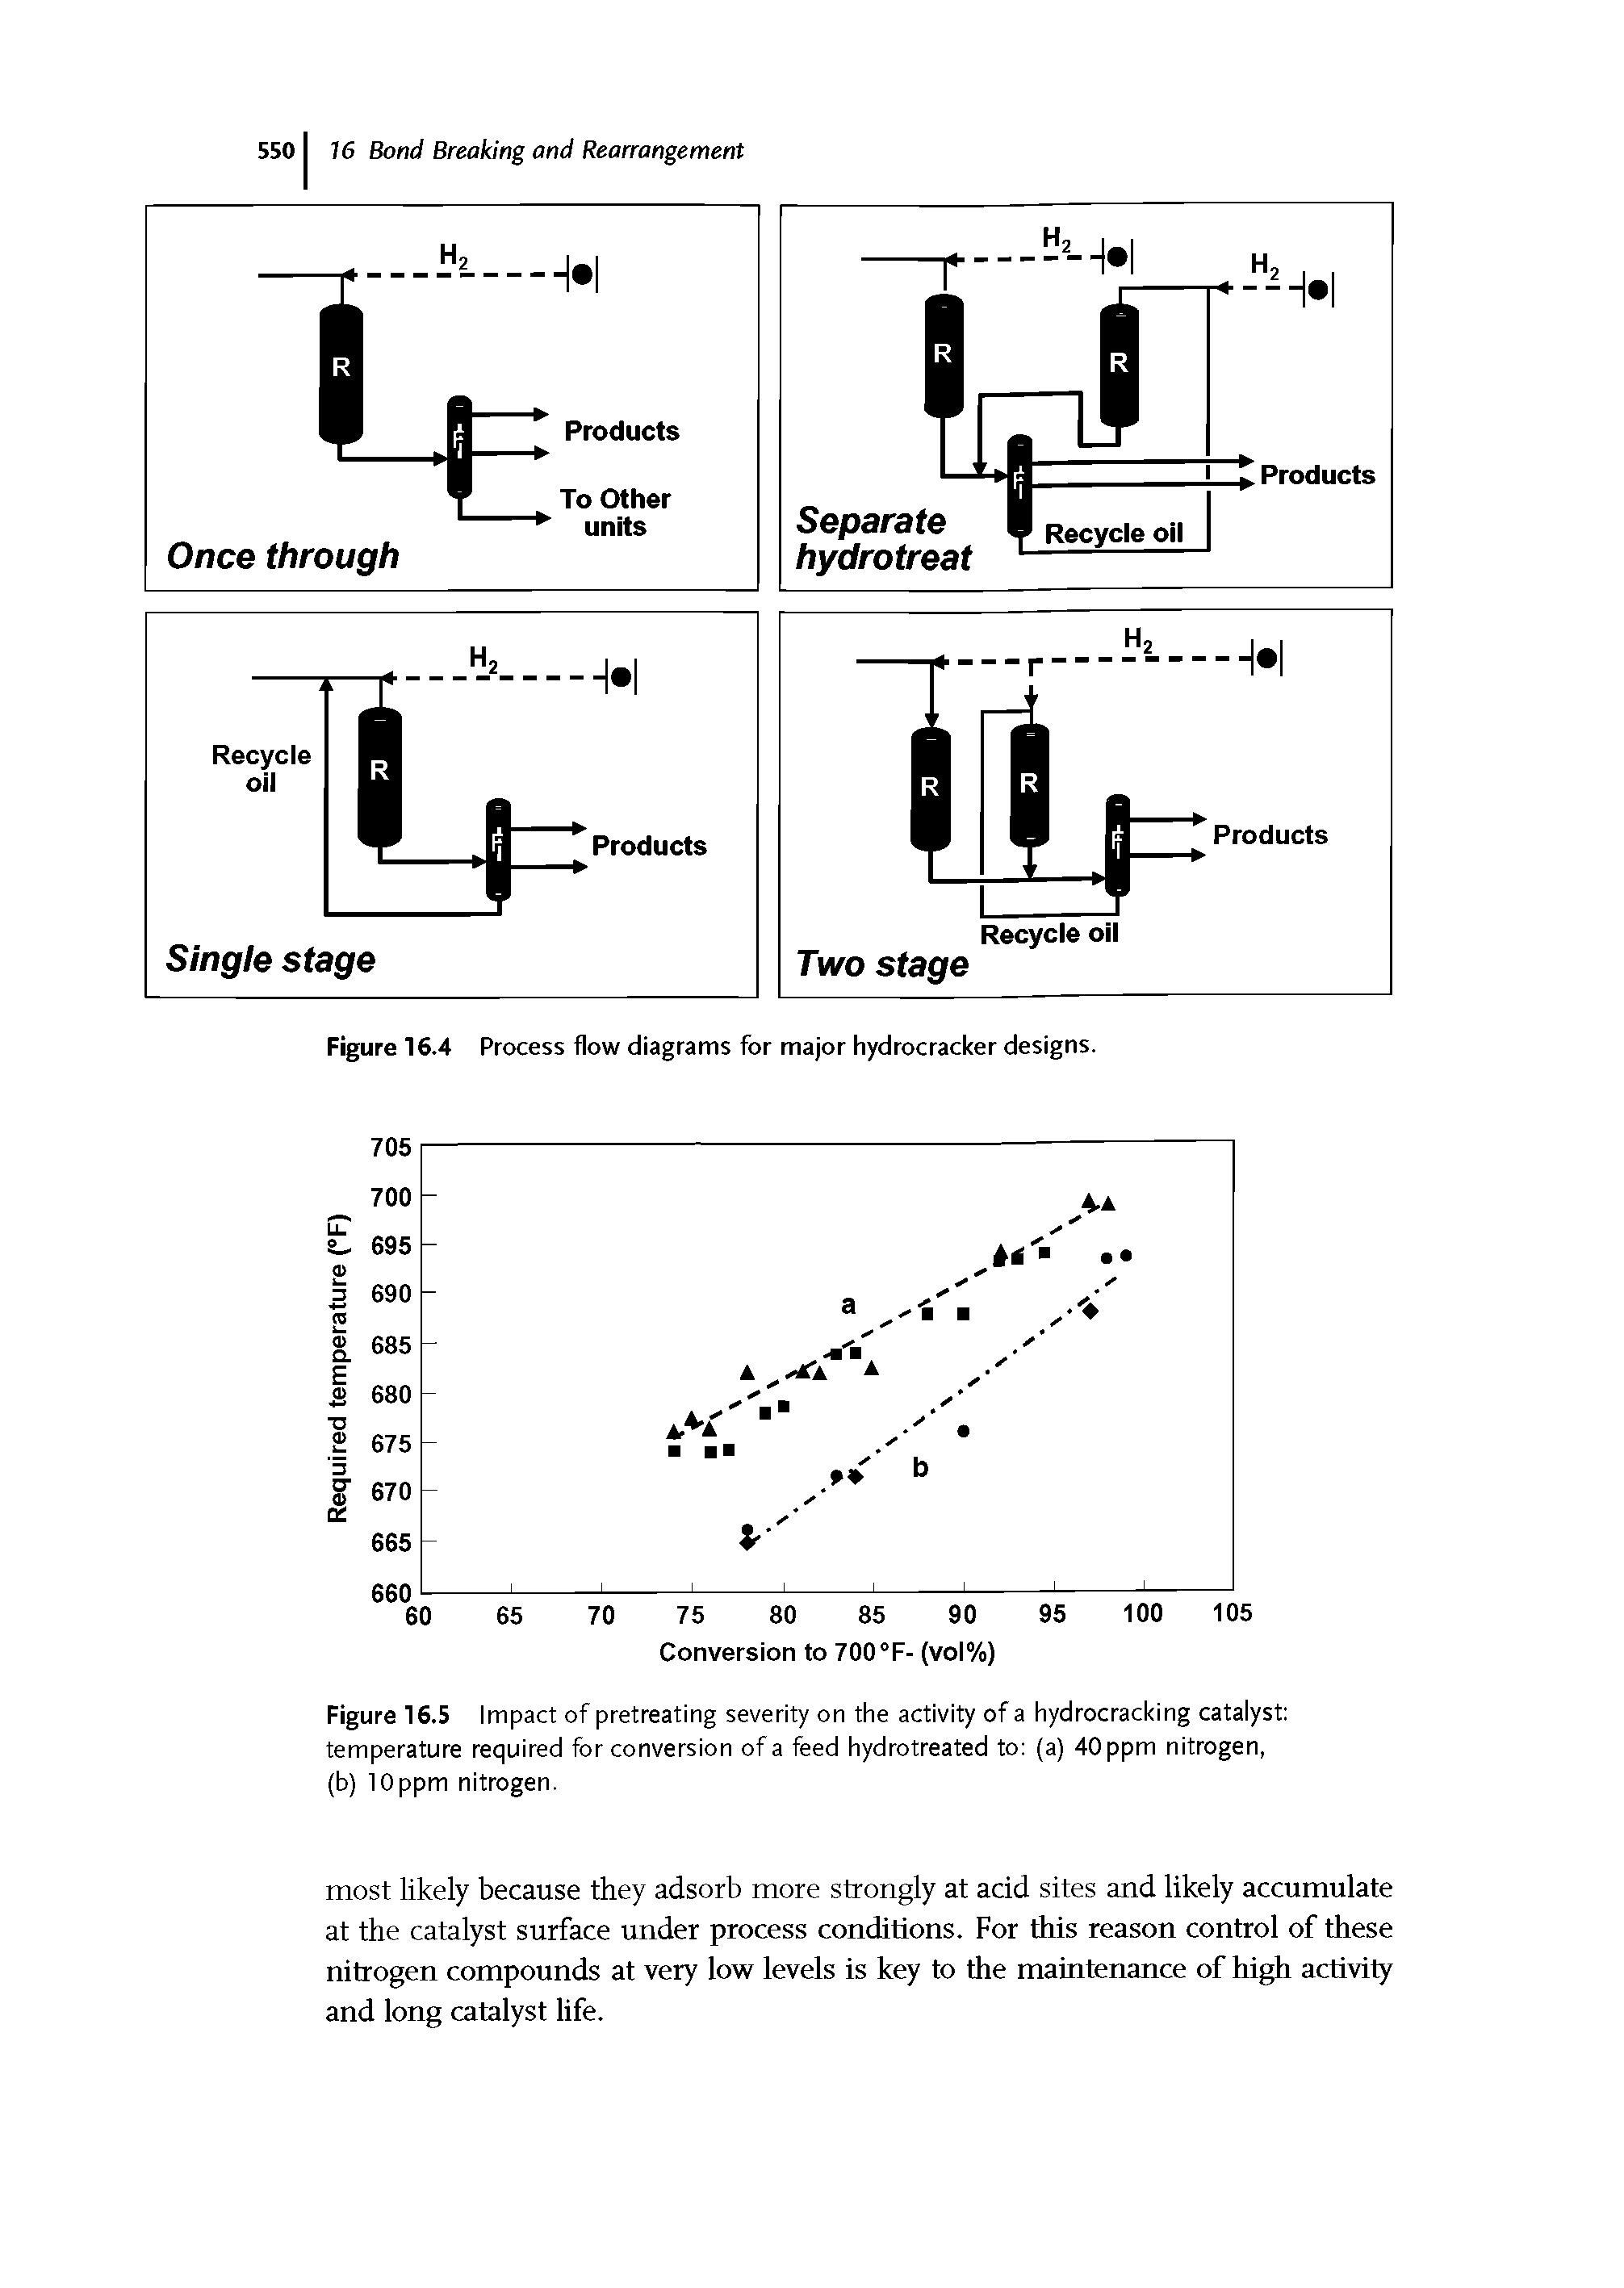 Figure 16.5 Impact of pretreating severity on the activity of a hydrocracking catalyst temperature required for conversion of a feed hydrotreated to (a) 40 ppm nitrogen, (b) 10ppm nitrogen.